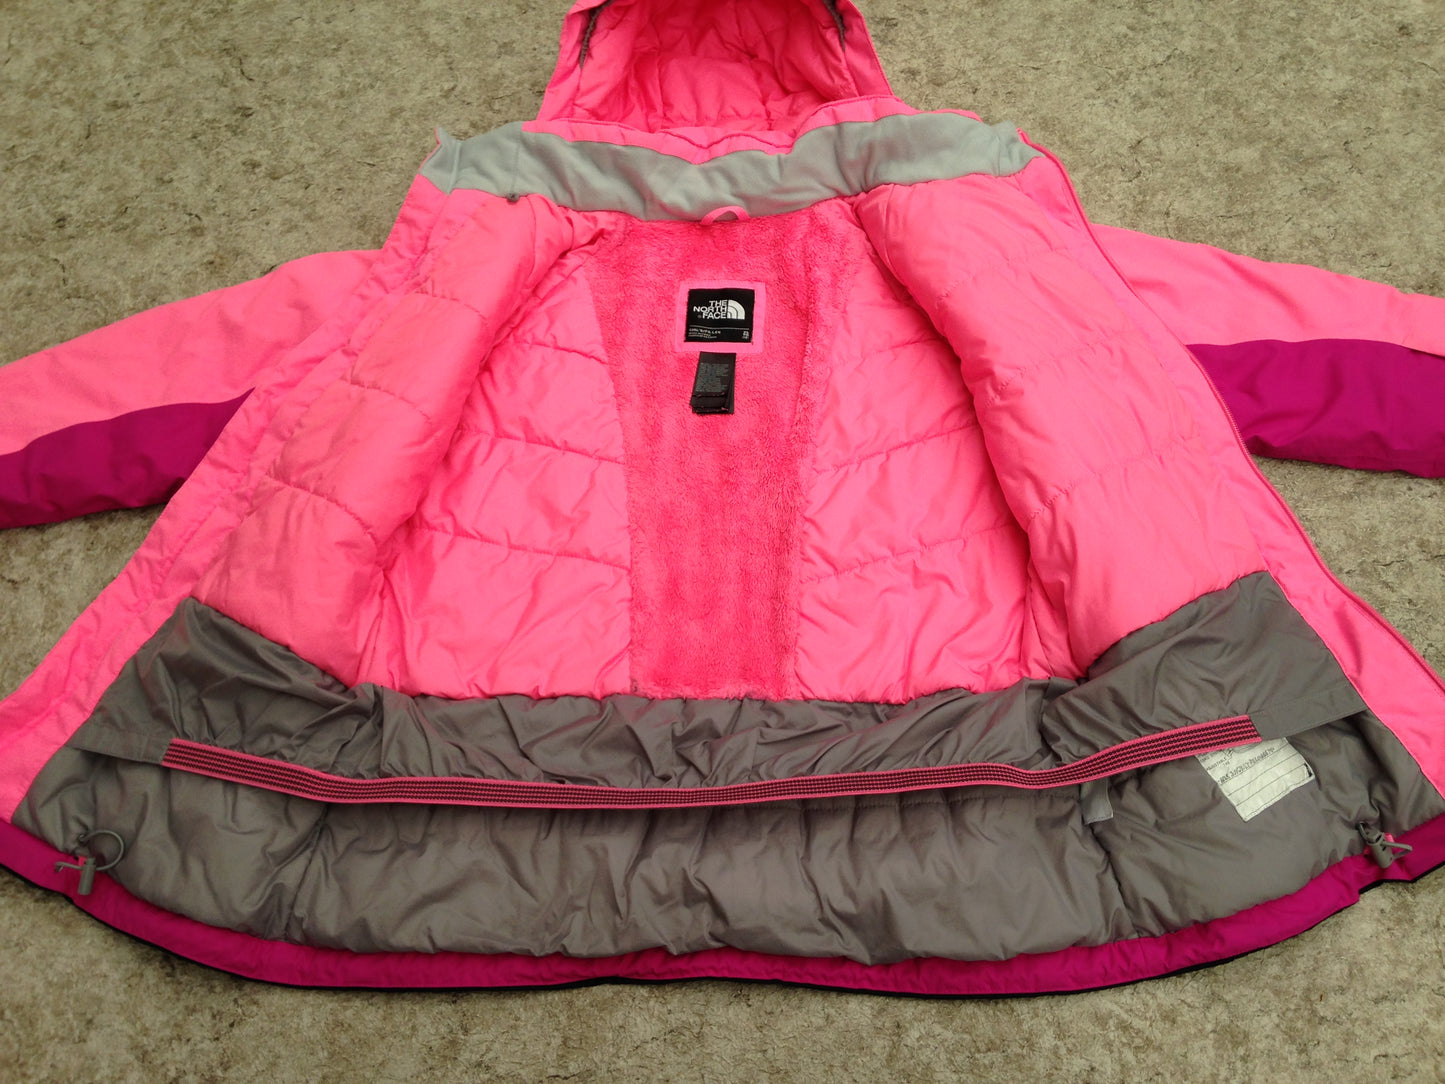 Winter Coat Child Size 14 The North Face Hyvent Snow Boarding Pink Black With Snow Belt